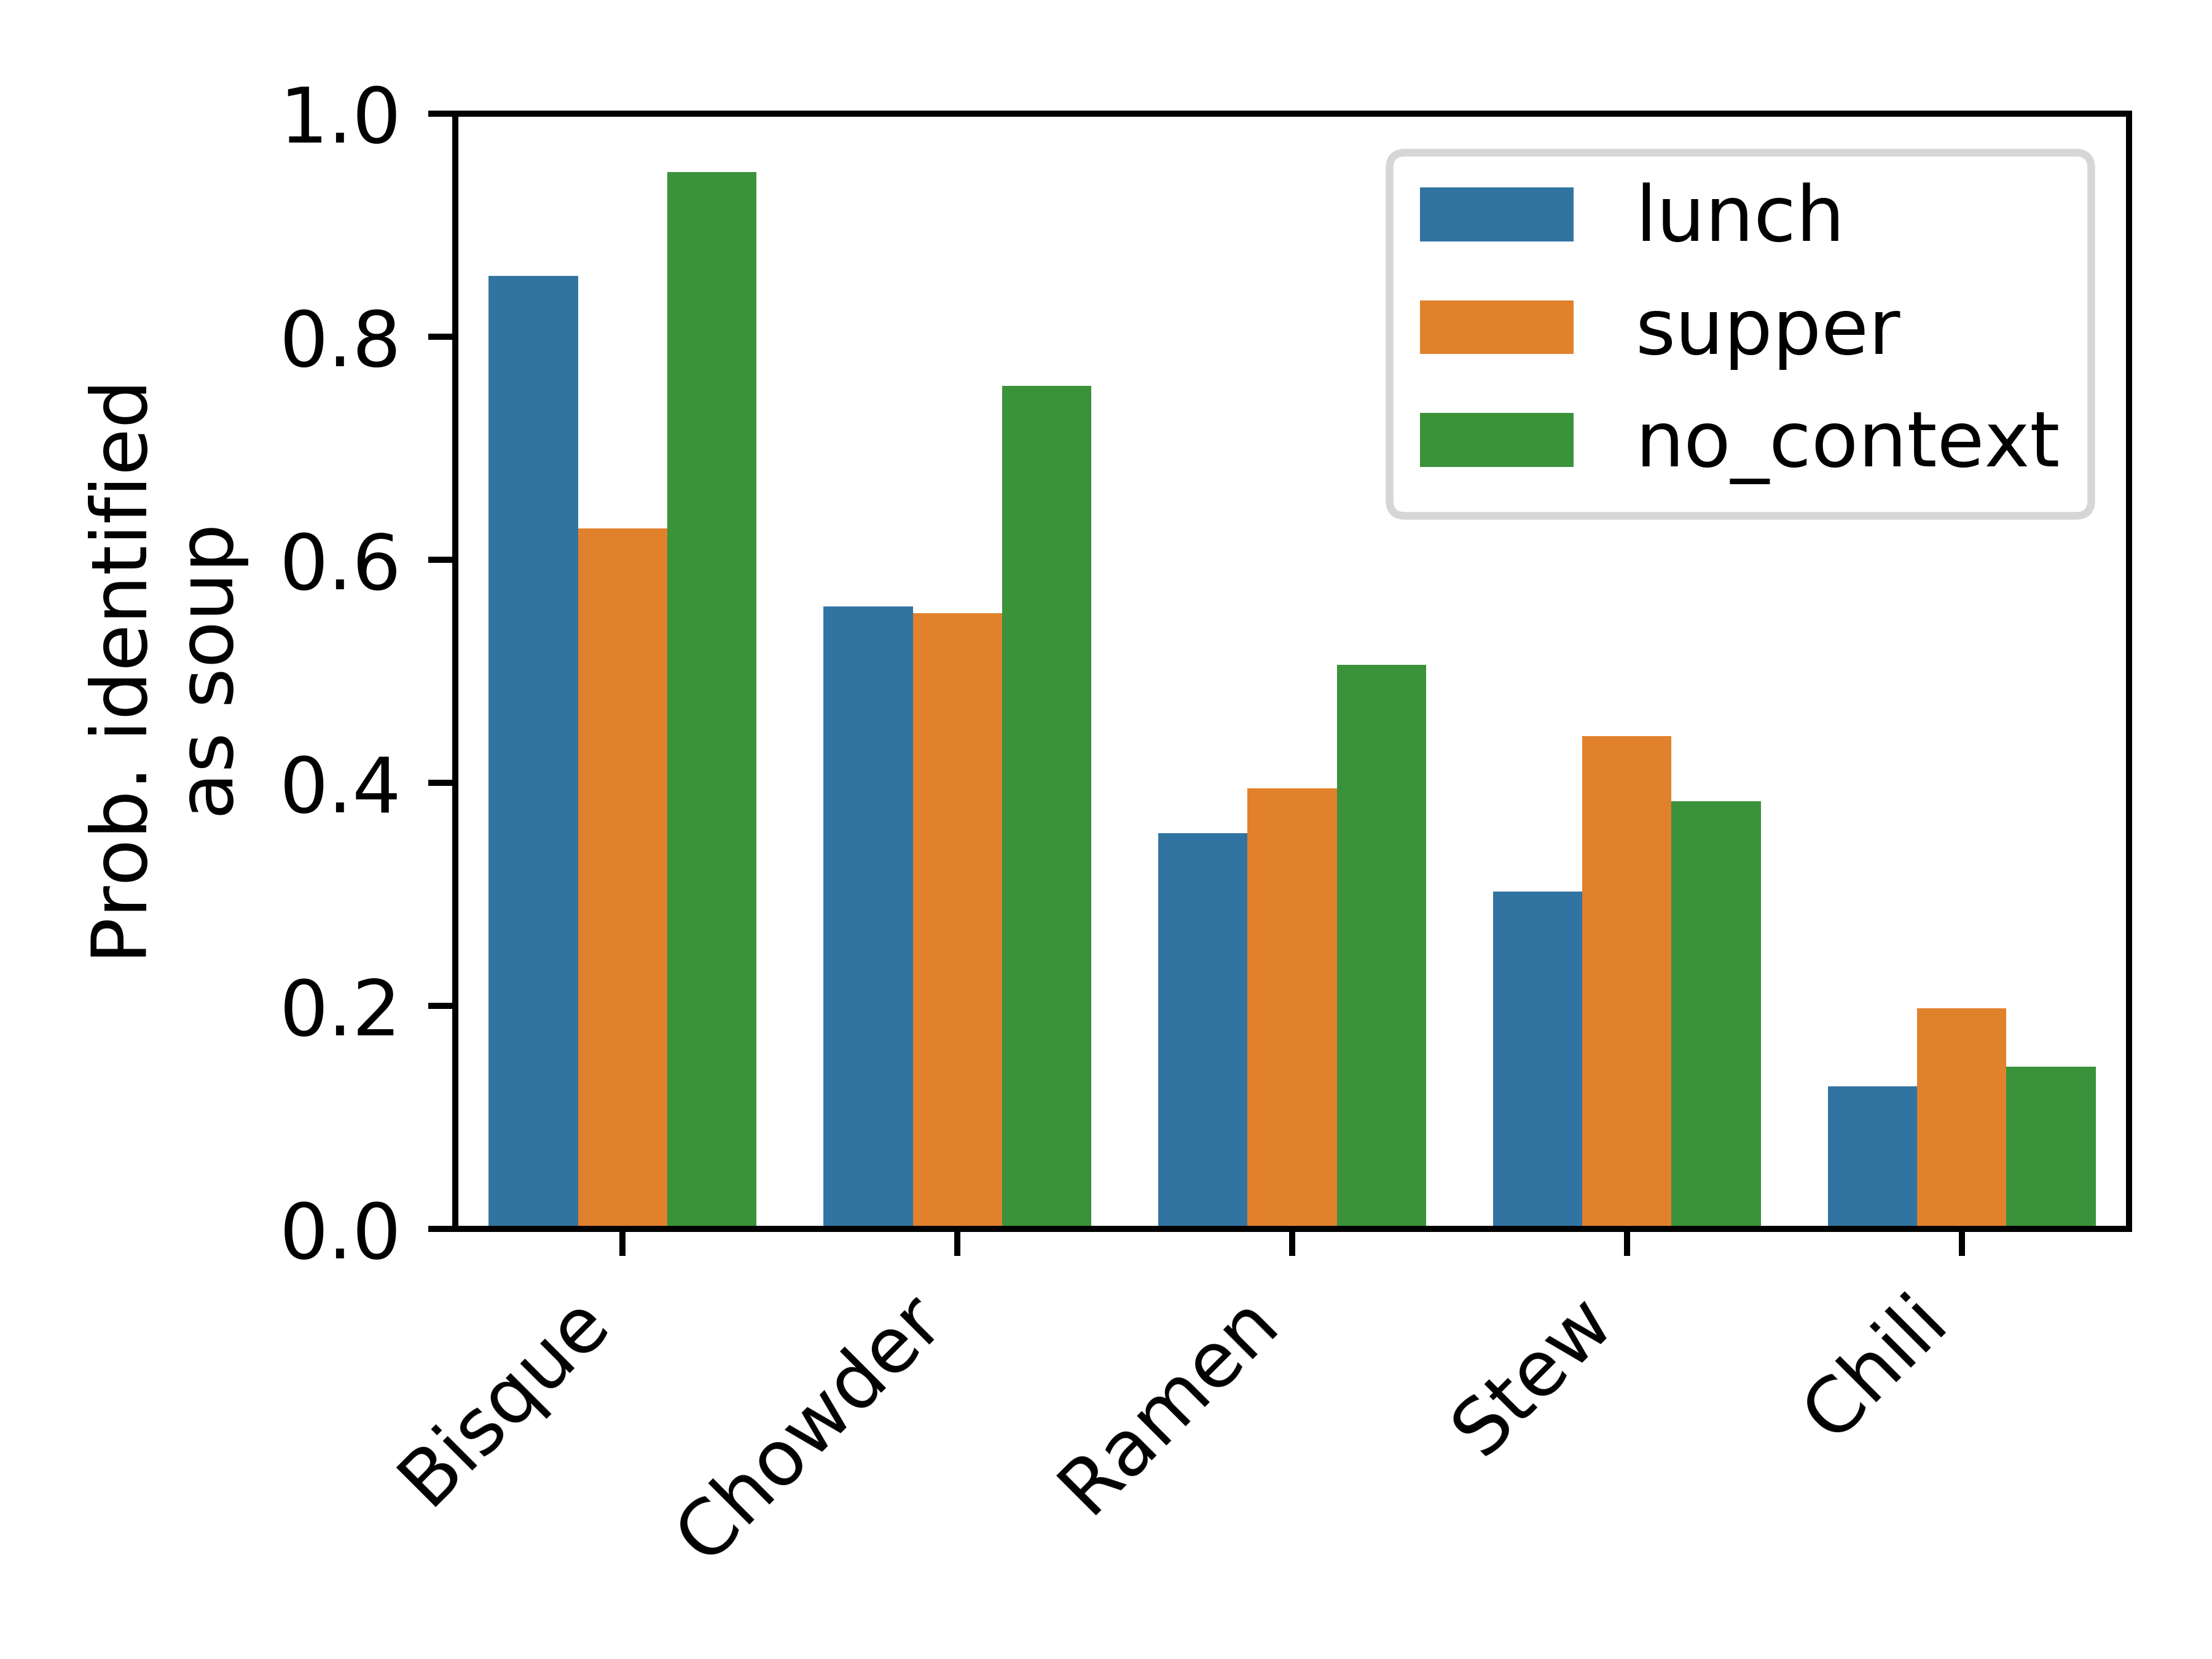 Bar chart showing proportion of respondents who
identified various foods as soups, stratified according to whether the dish was
presented in the context of a lunch or supper meal.